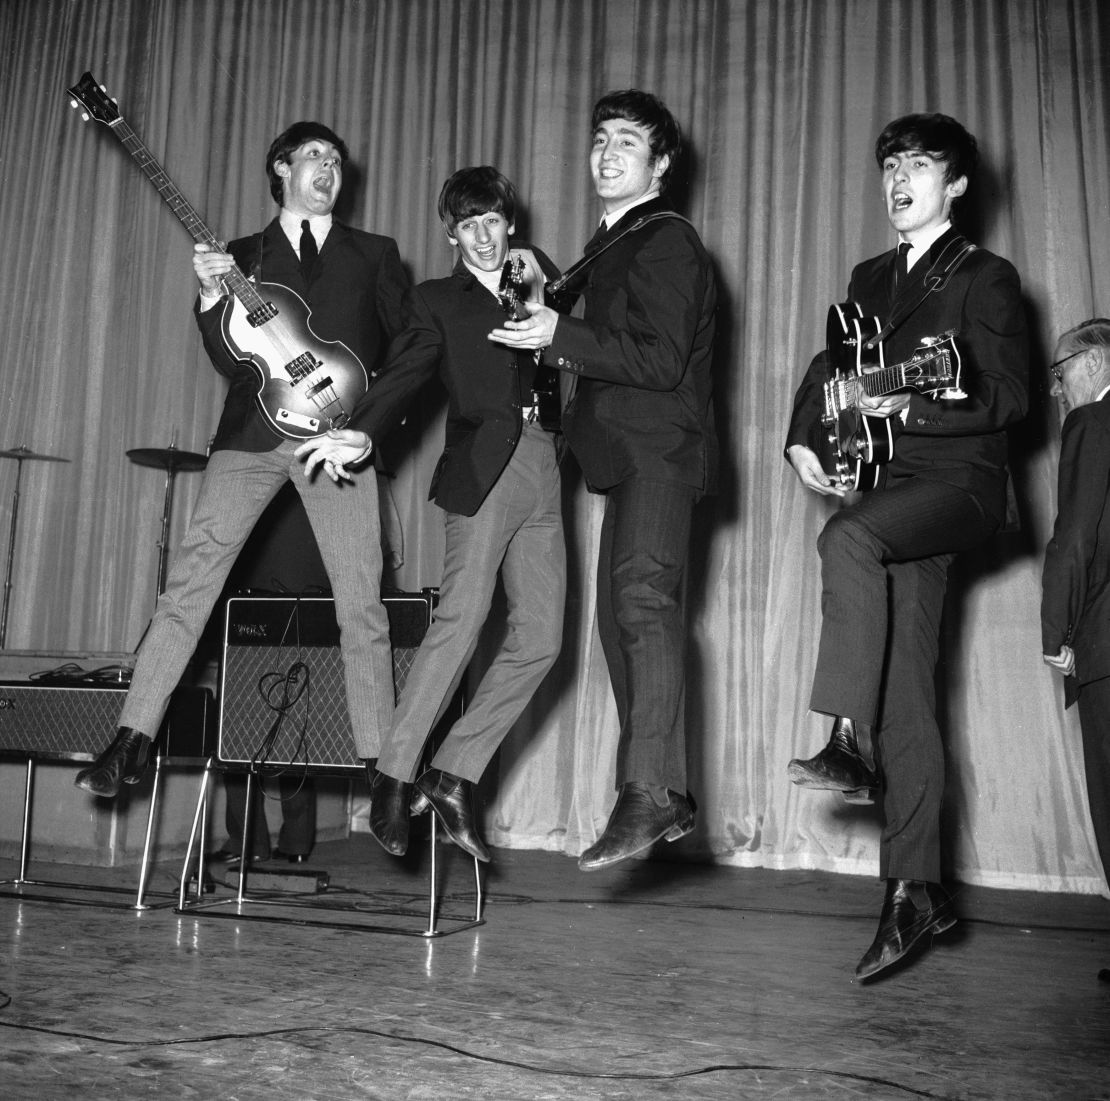 The Beatles' popularity, energy and cleverness made them favorites on the BBC.